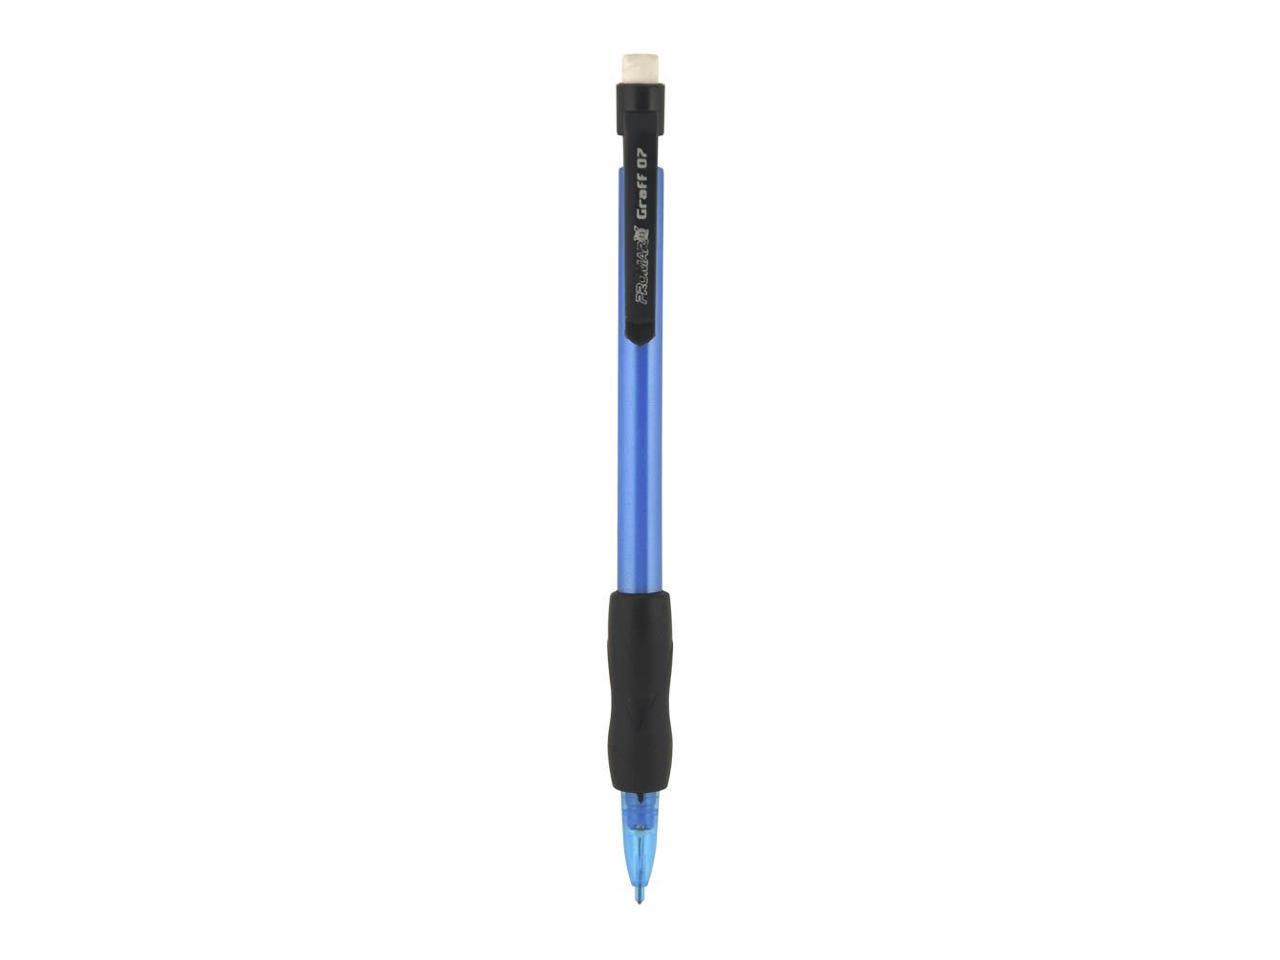 Extra Lead and Eraser ... Details about   Promarx Graff 07 Mechanical Pencils with Comfort Grip 